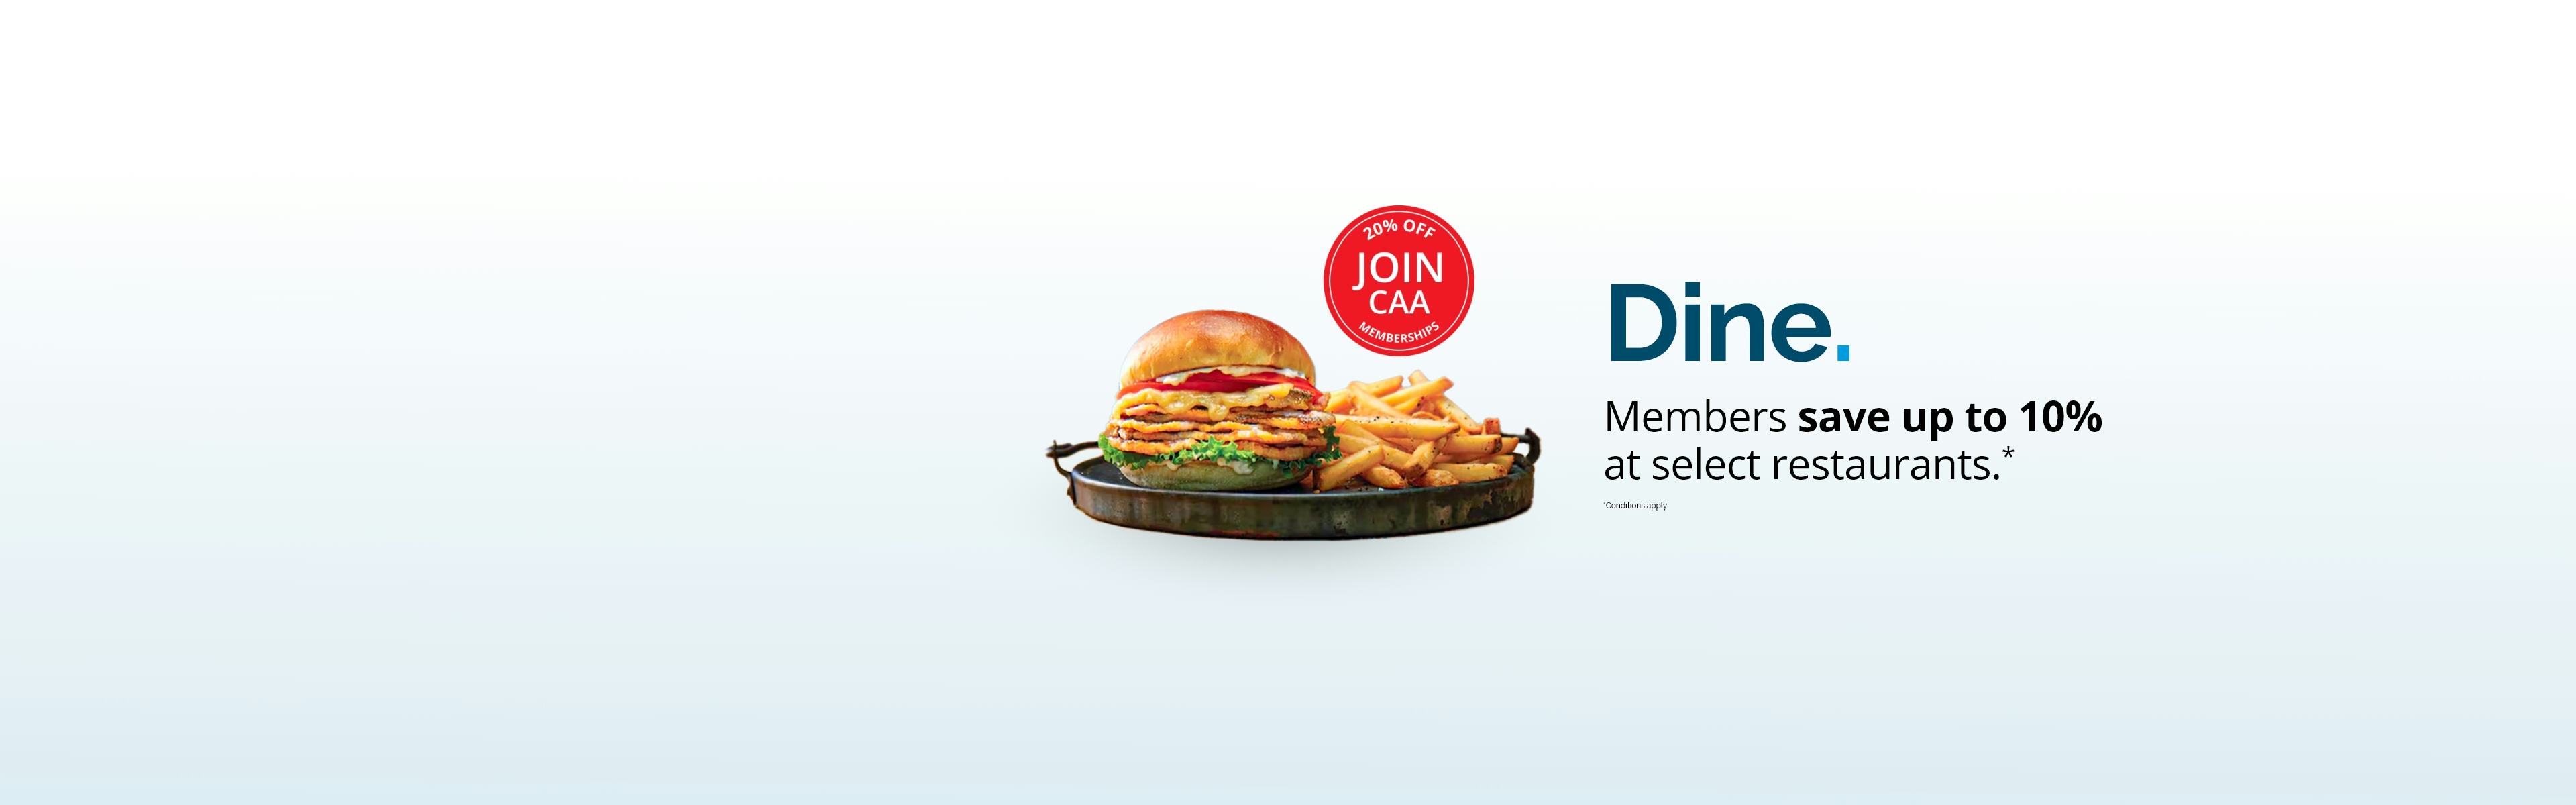 [Join CAA - 20% off Memberships]
Dine. Members save up to 10% at select restaurants. *Conditions apply.